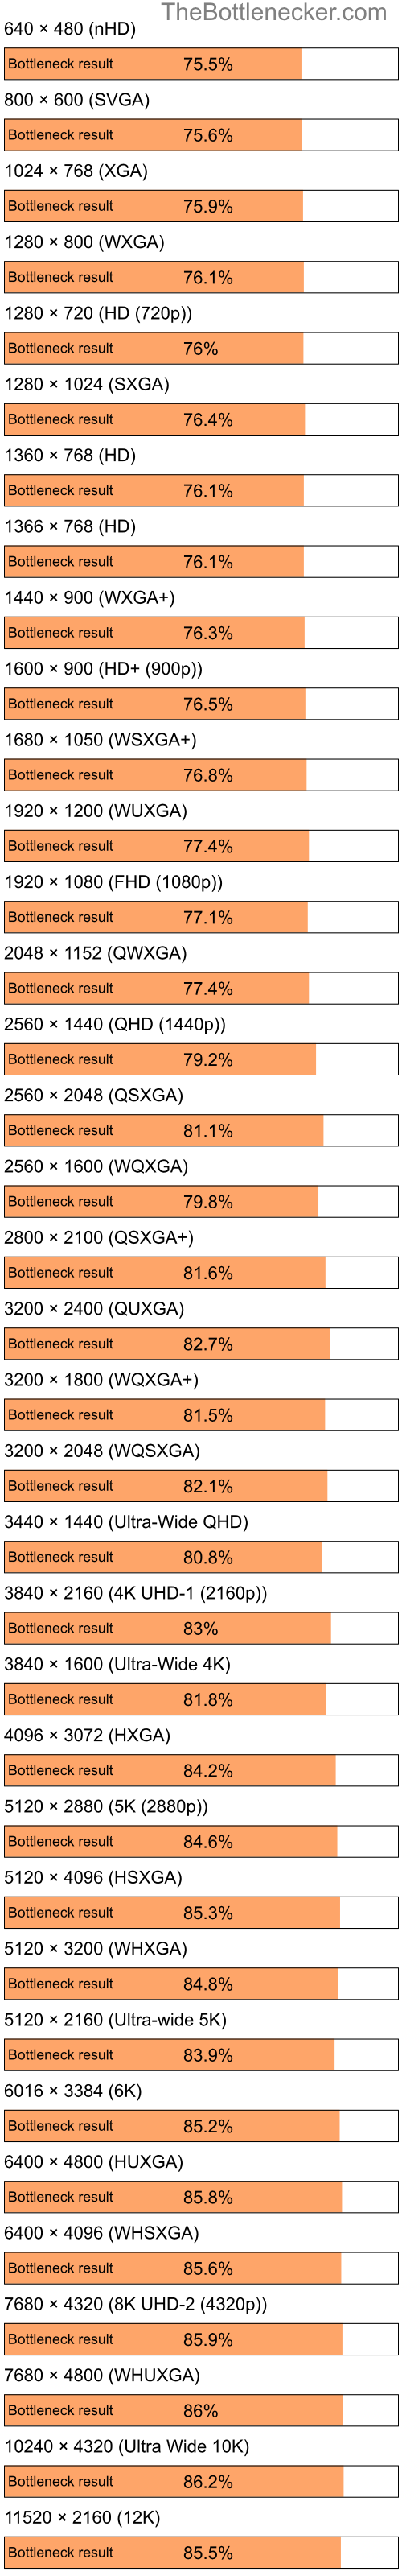 Bottleneck results by resolution for Intel Pentium 4 and AMD Mobility Radeon 9700 in7 Days to Die